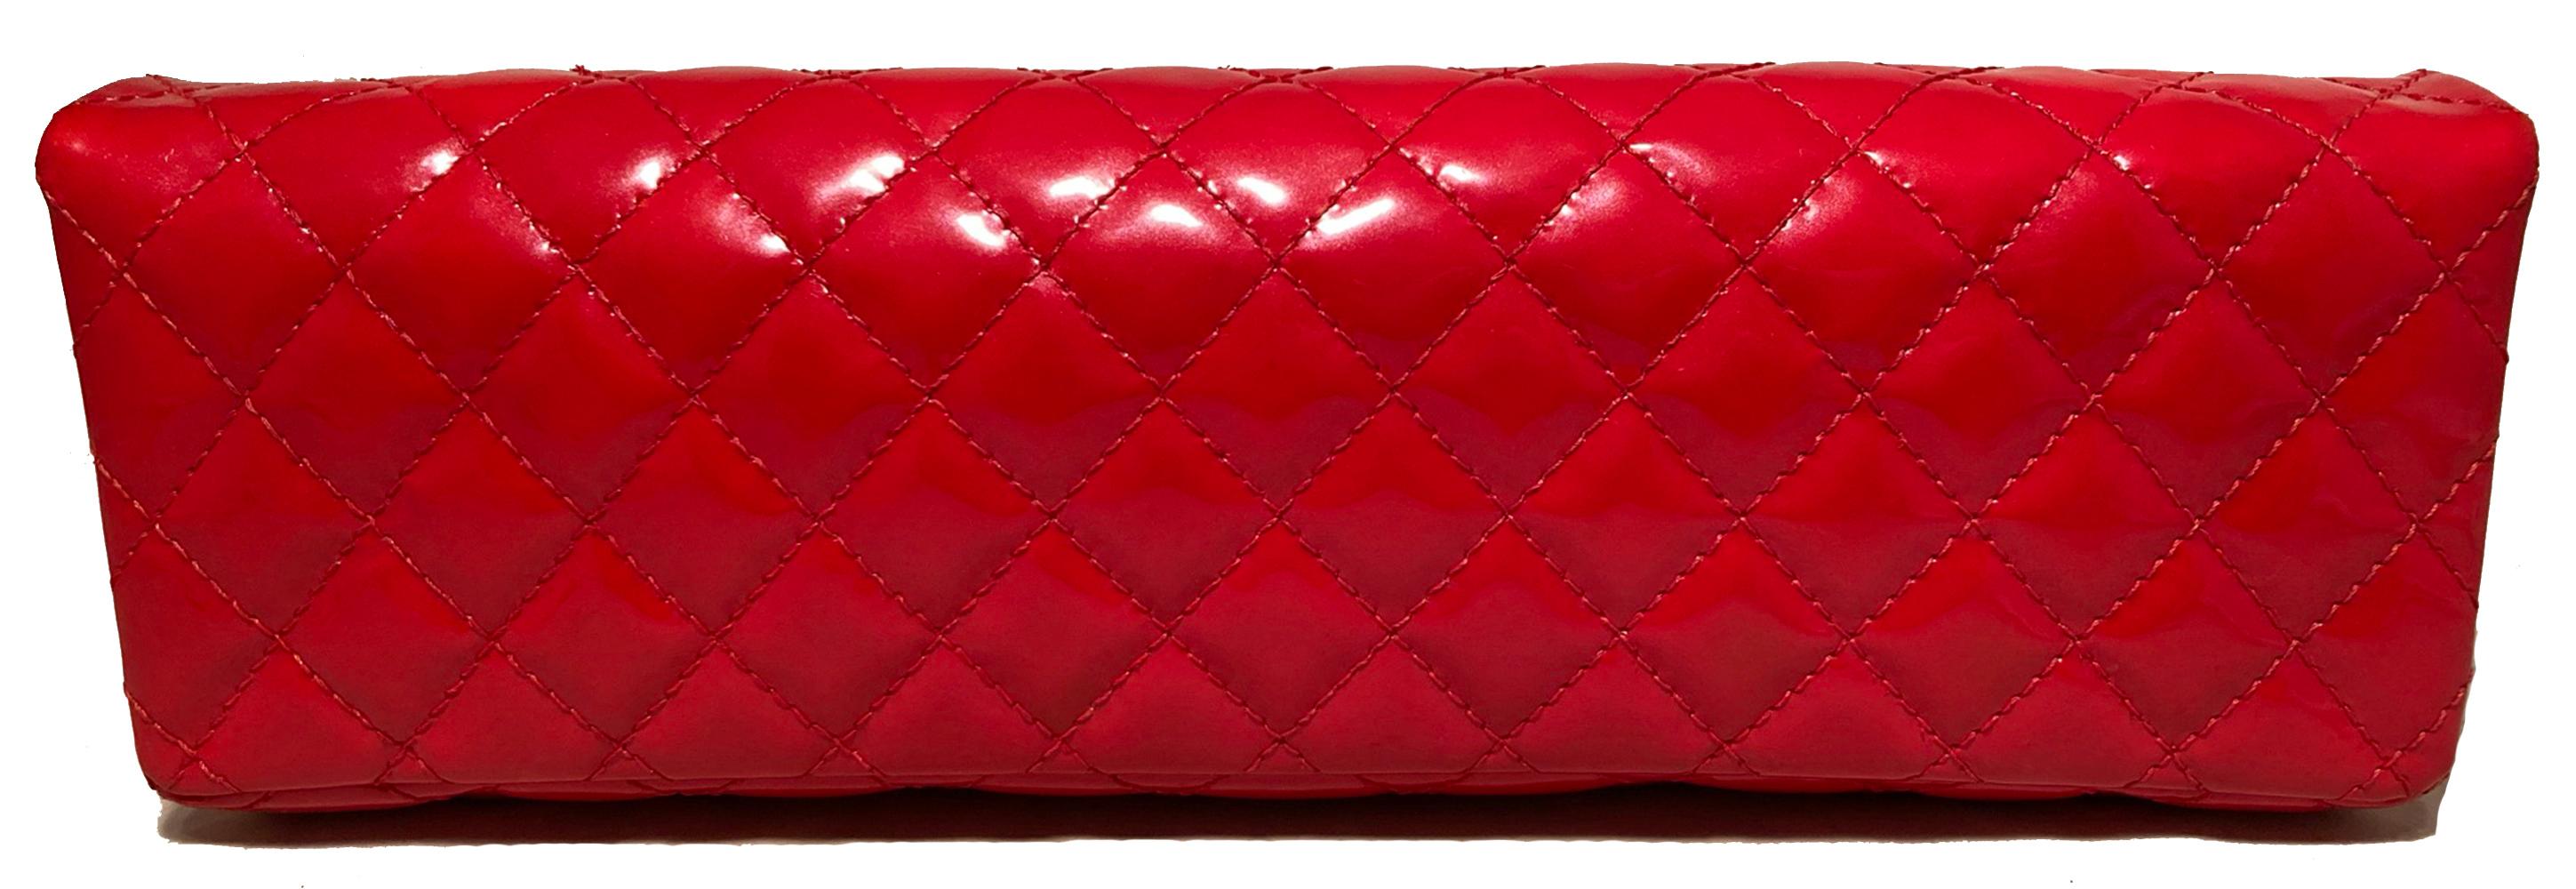 Chanel Red 2.55 Reissue Quilted Patent Leather East/West Clutch in excellent condition. Quilted red patent leather exterior trimmed with gold hardware. Front mademoiselle twist closure opens via single flap to a red leather lined interior with